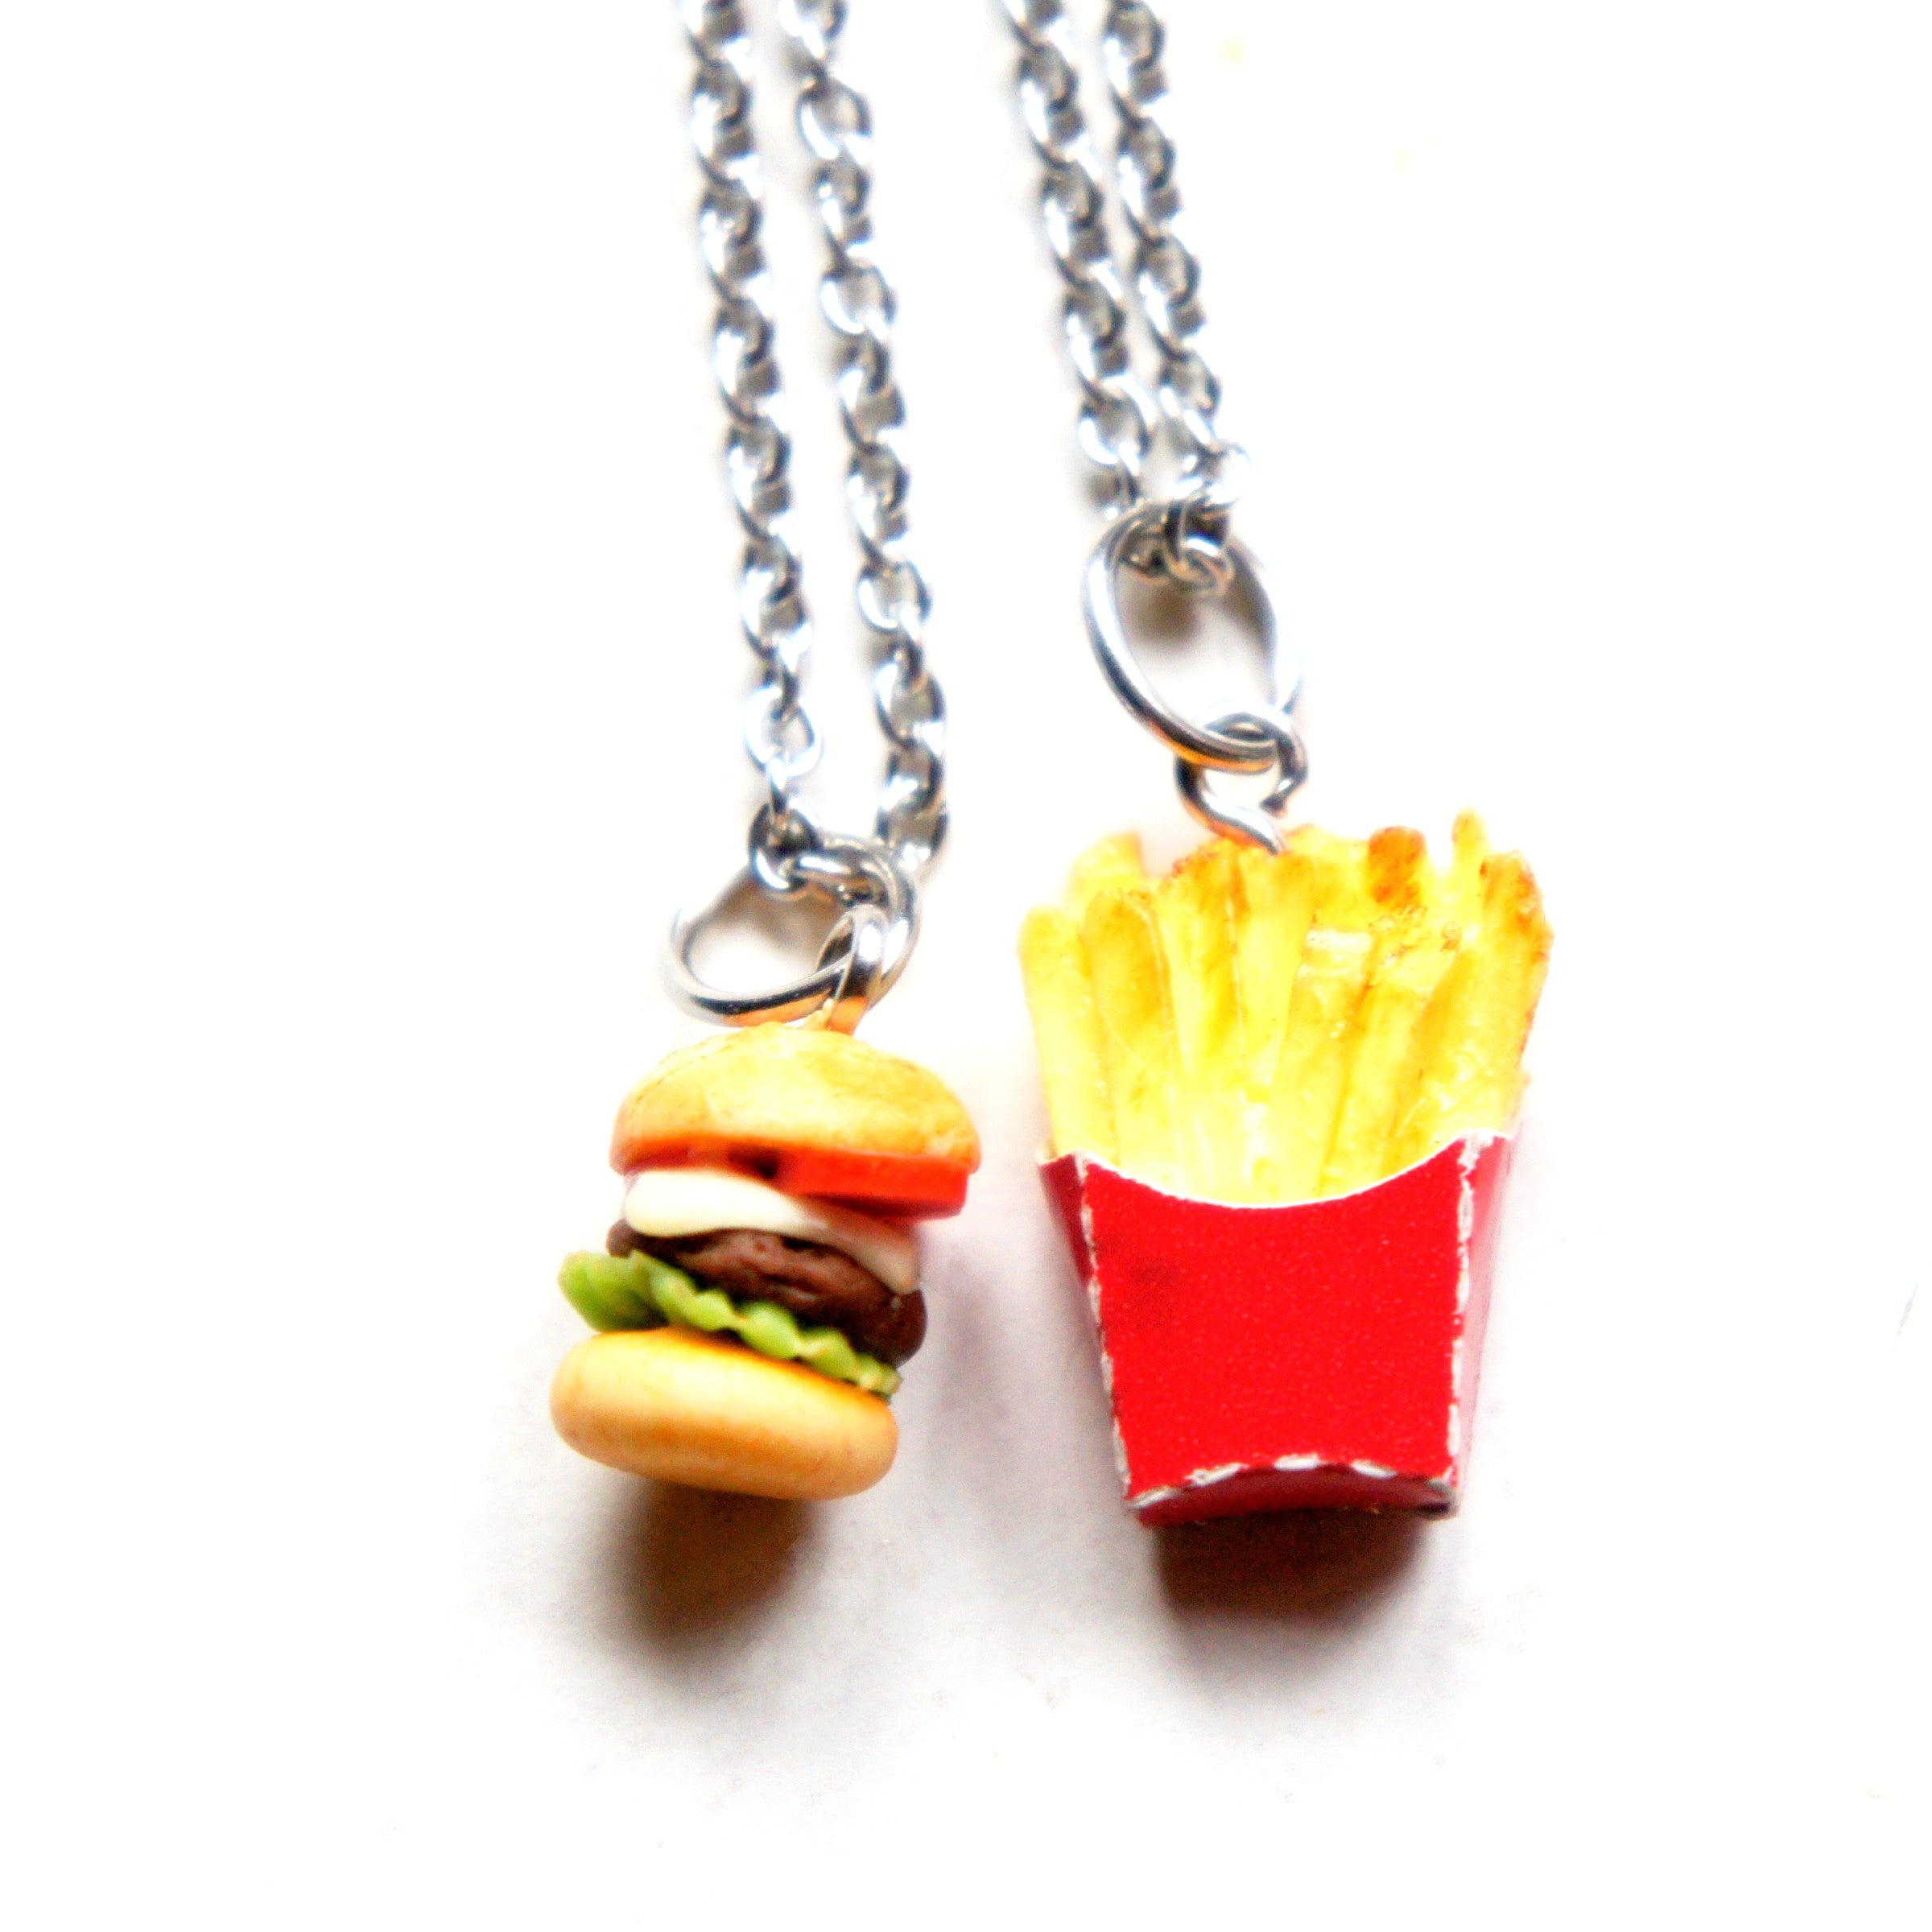 Burger and Fries Friendship Necklace Set